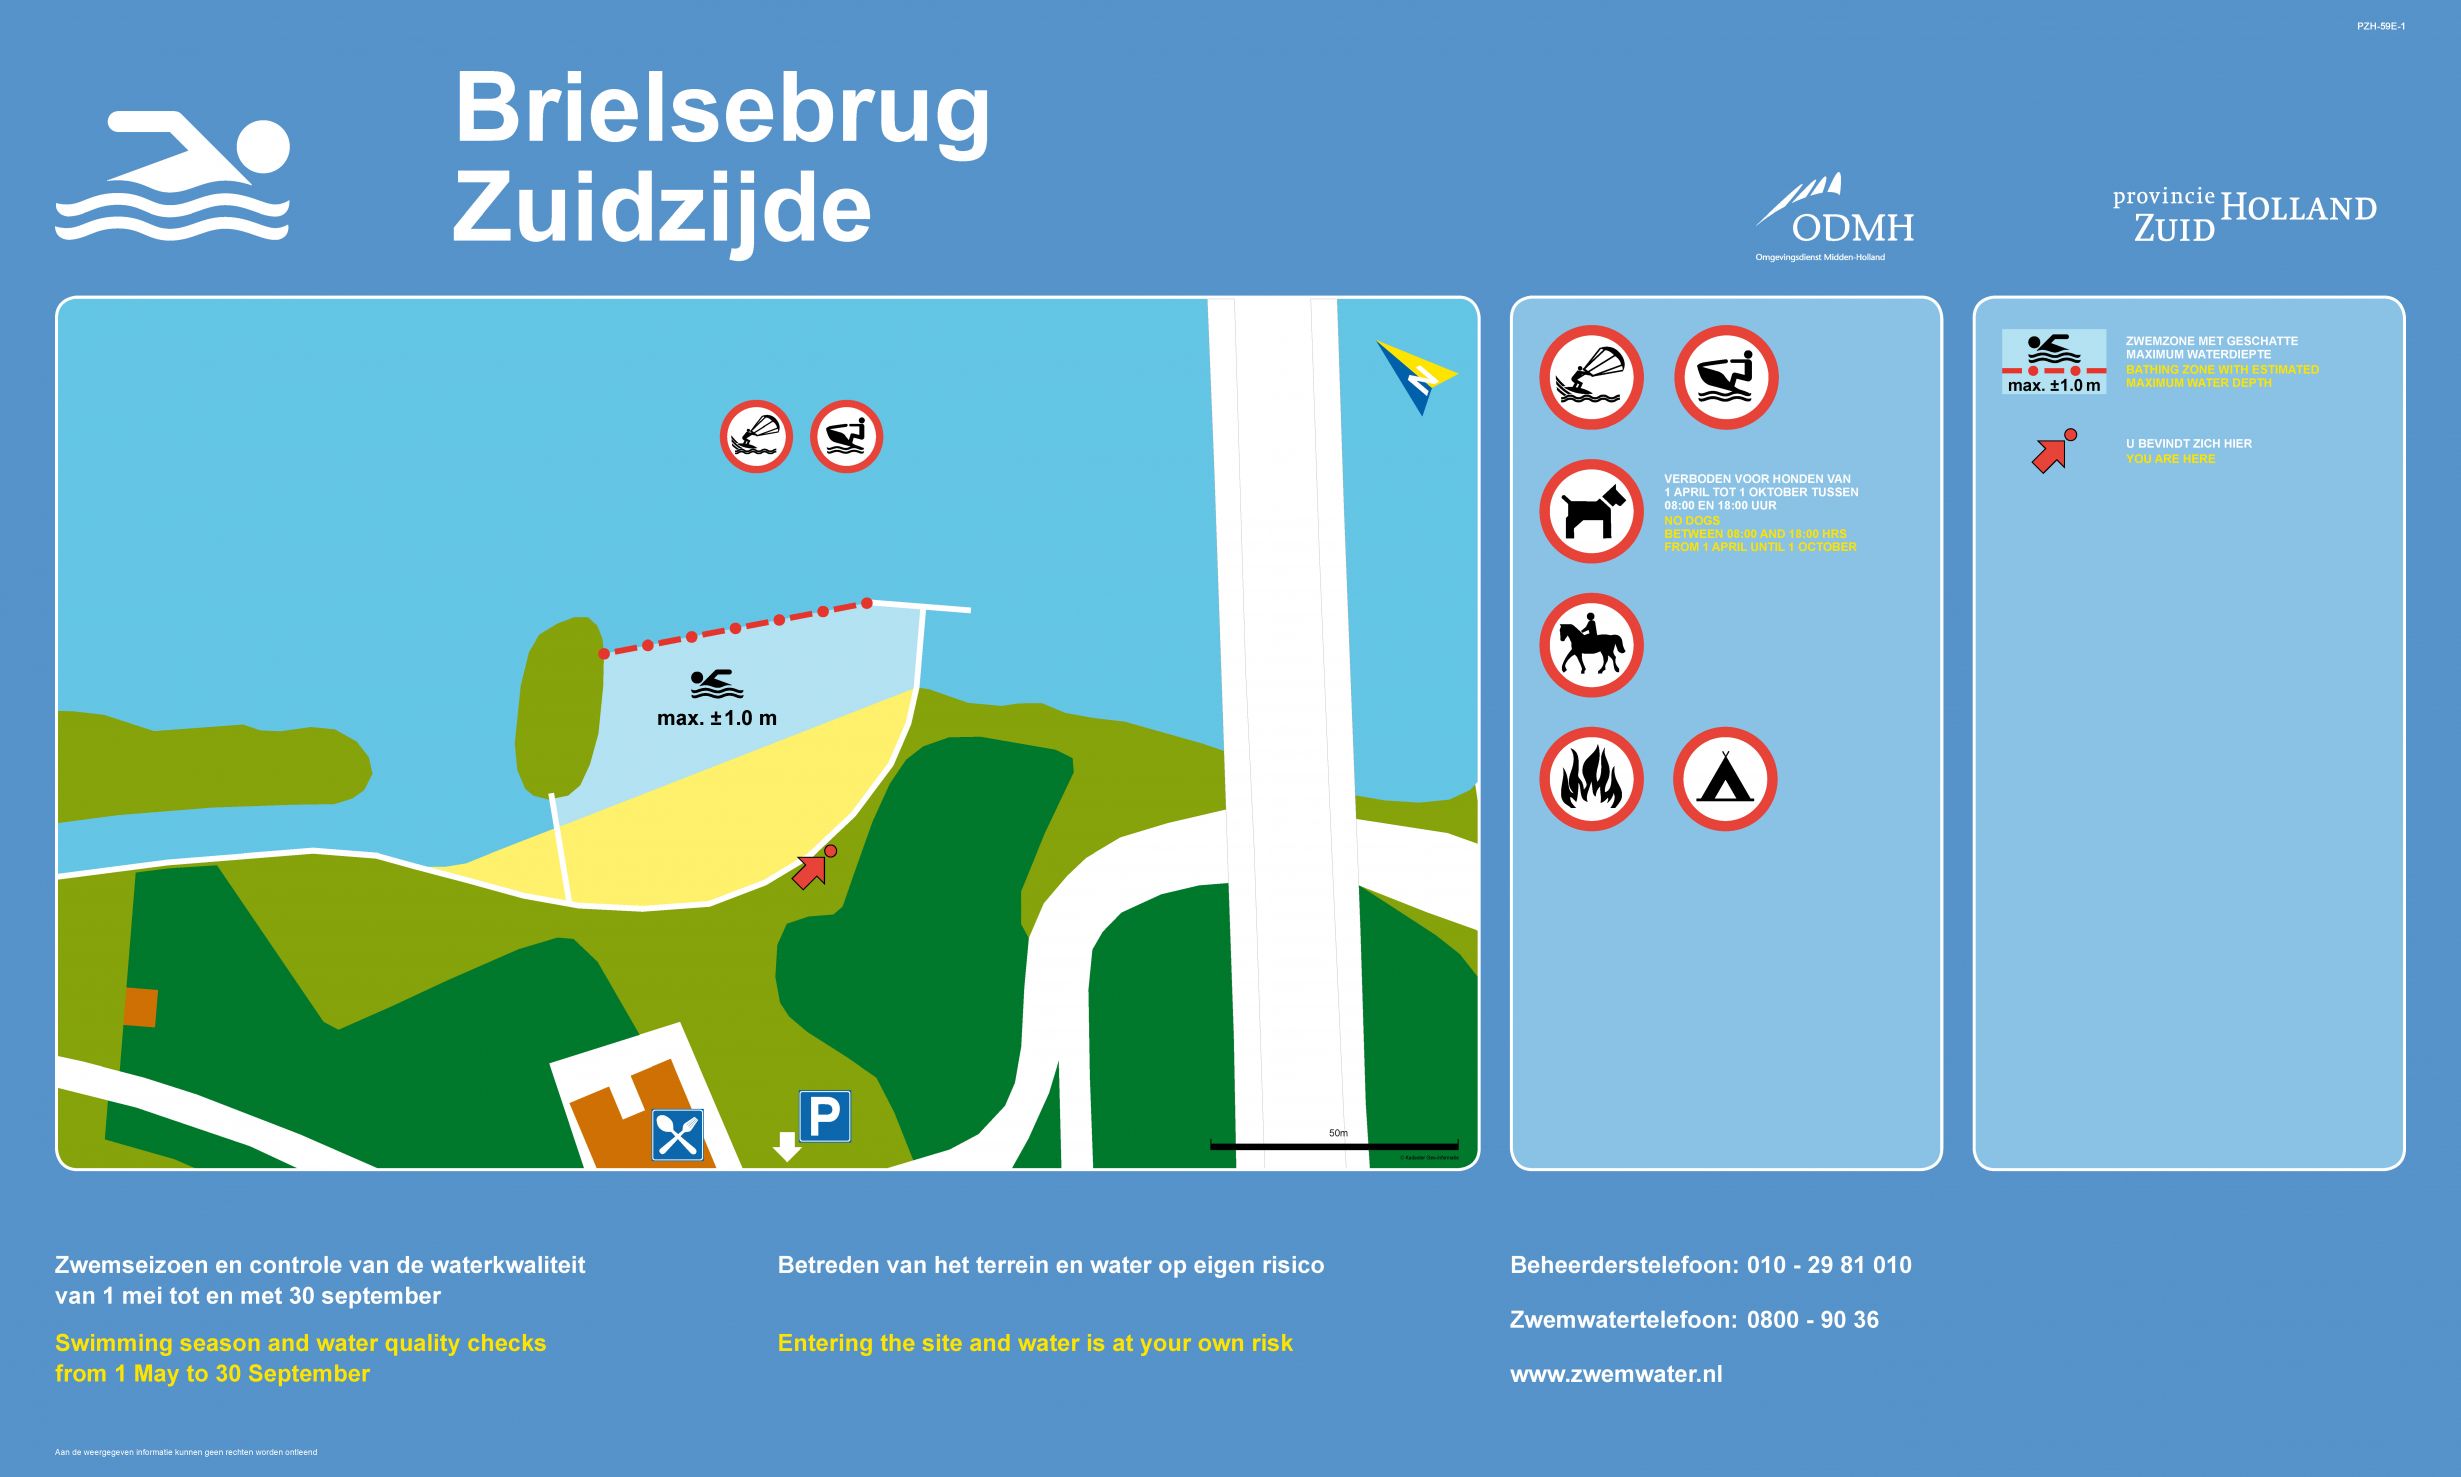 The information board at the swimming location Brielse Meer Brielsebrug Zuidzijde